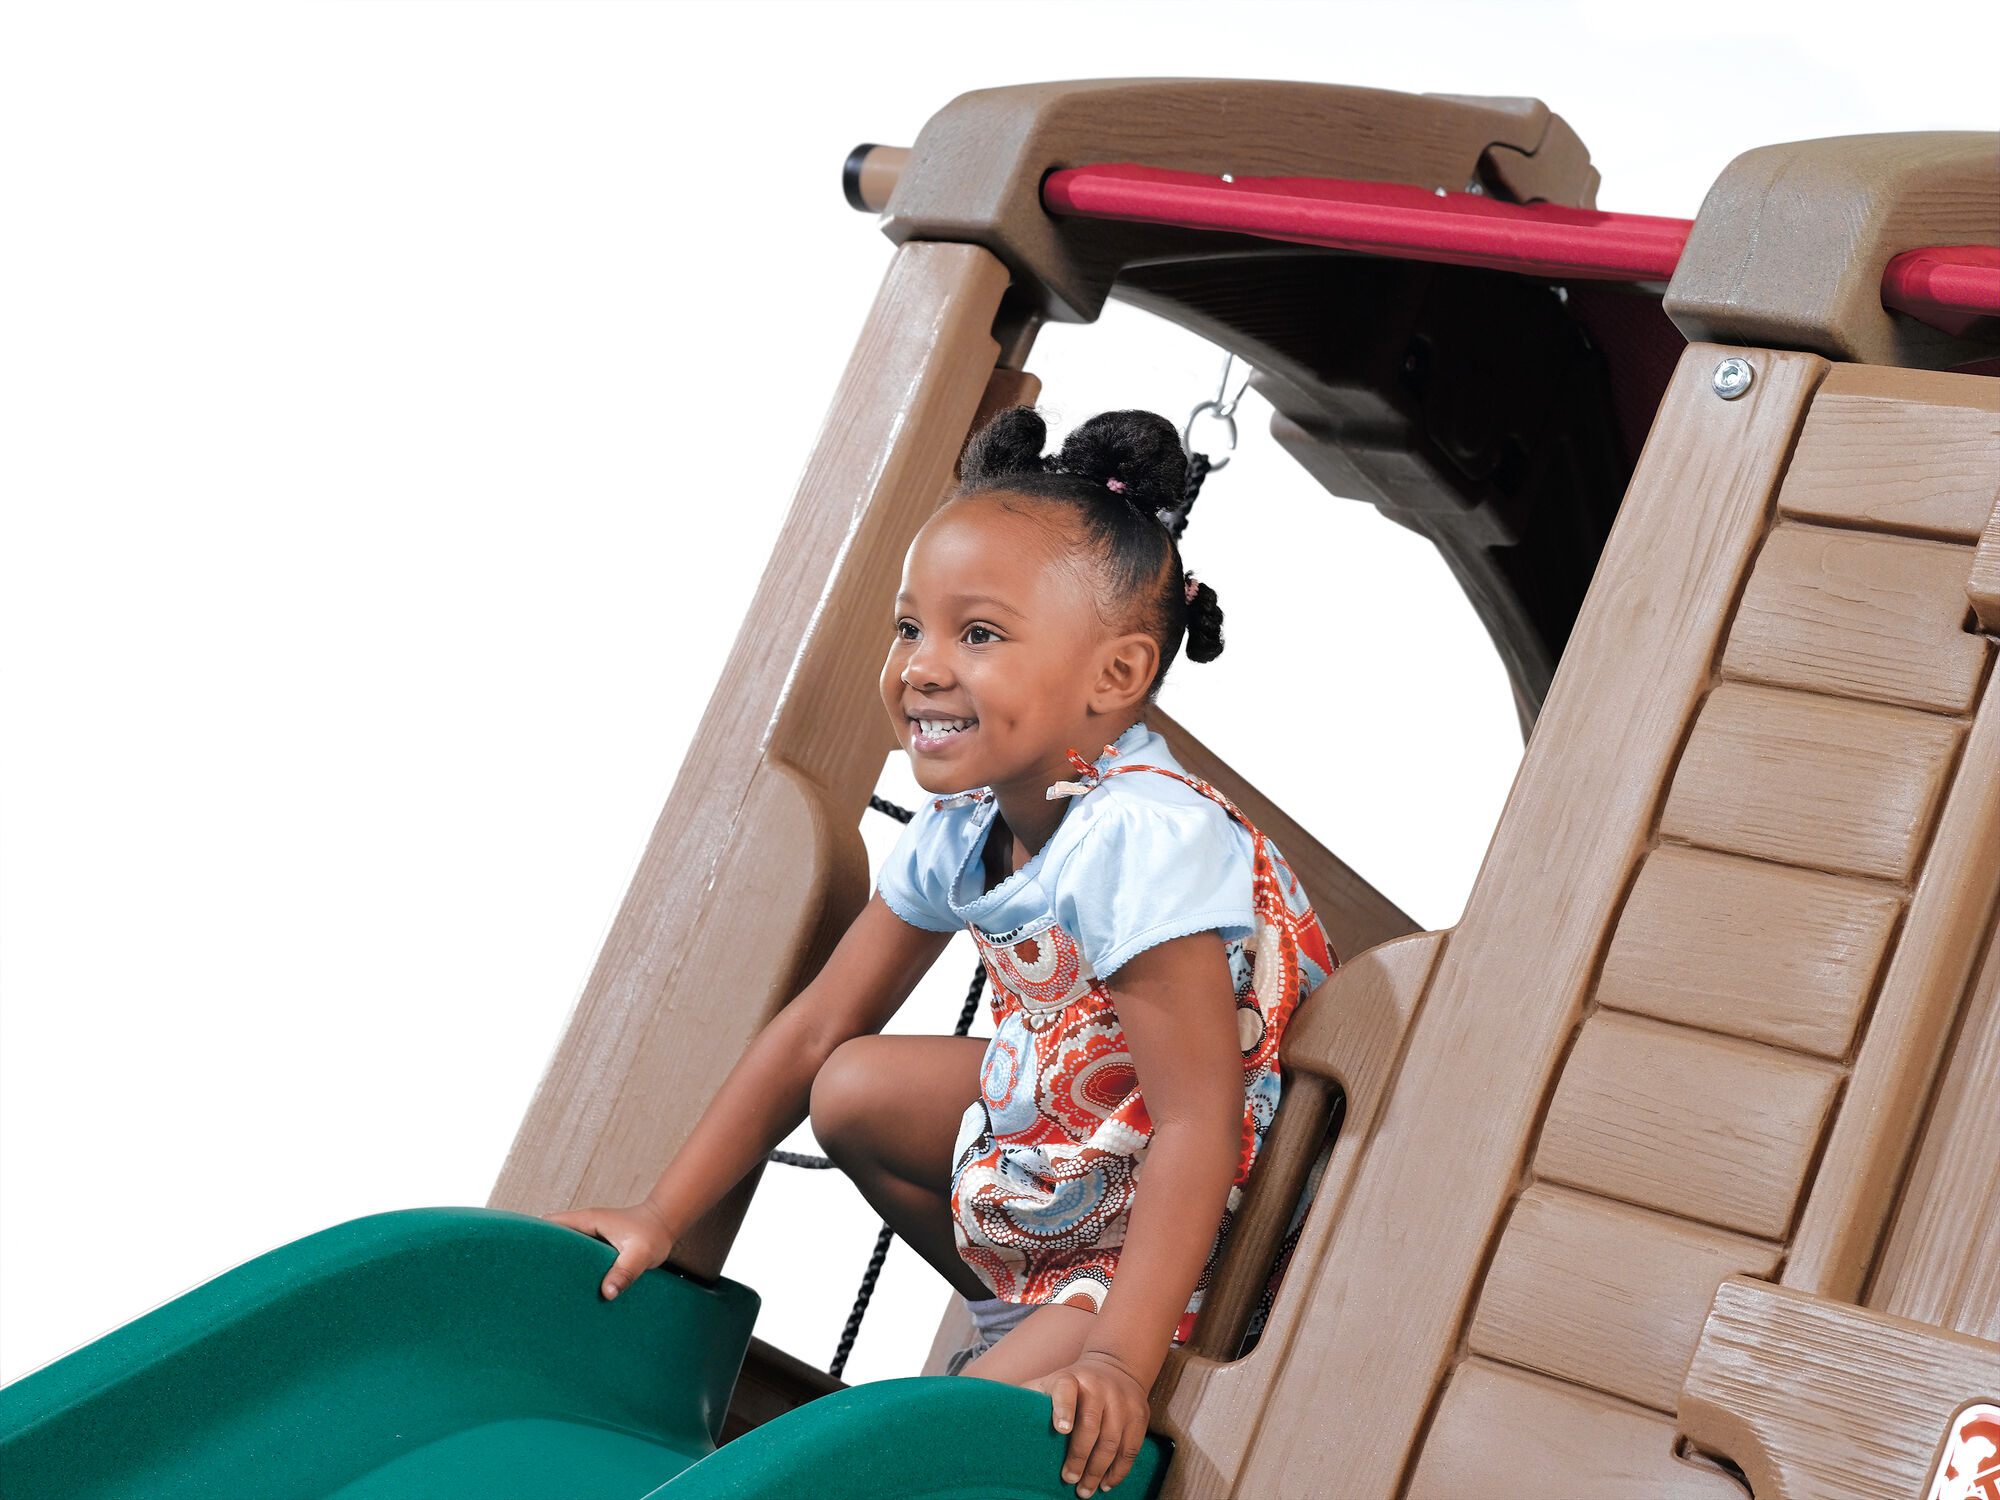 productfoto-mensen Step2 Naturally Playful Adventure Lodge Play Center